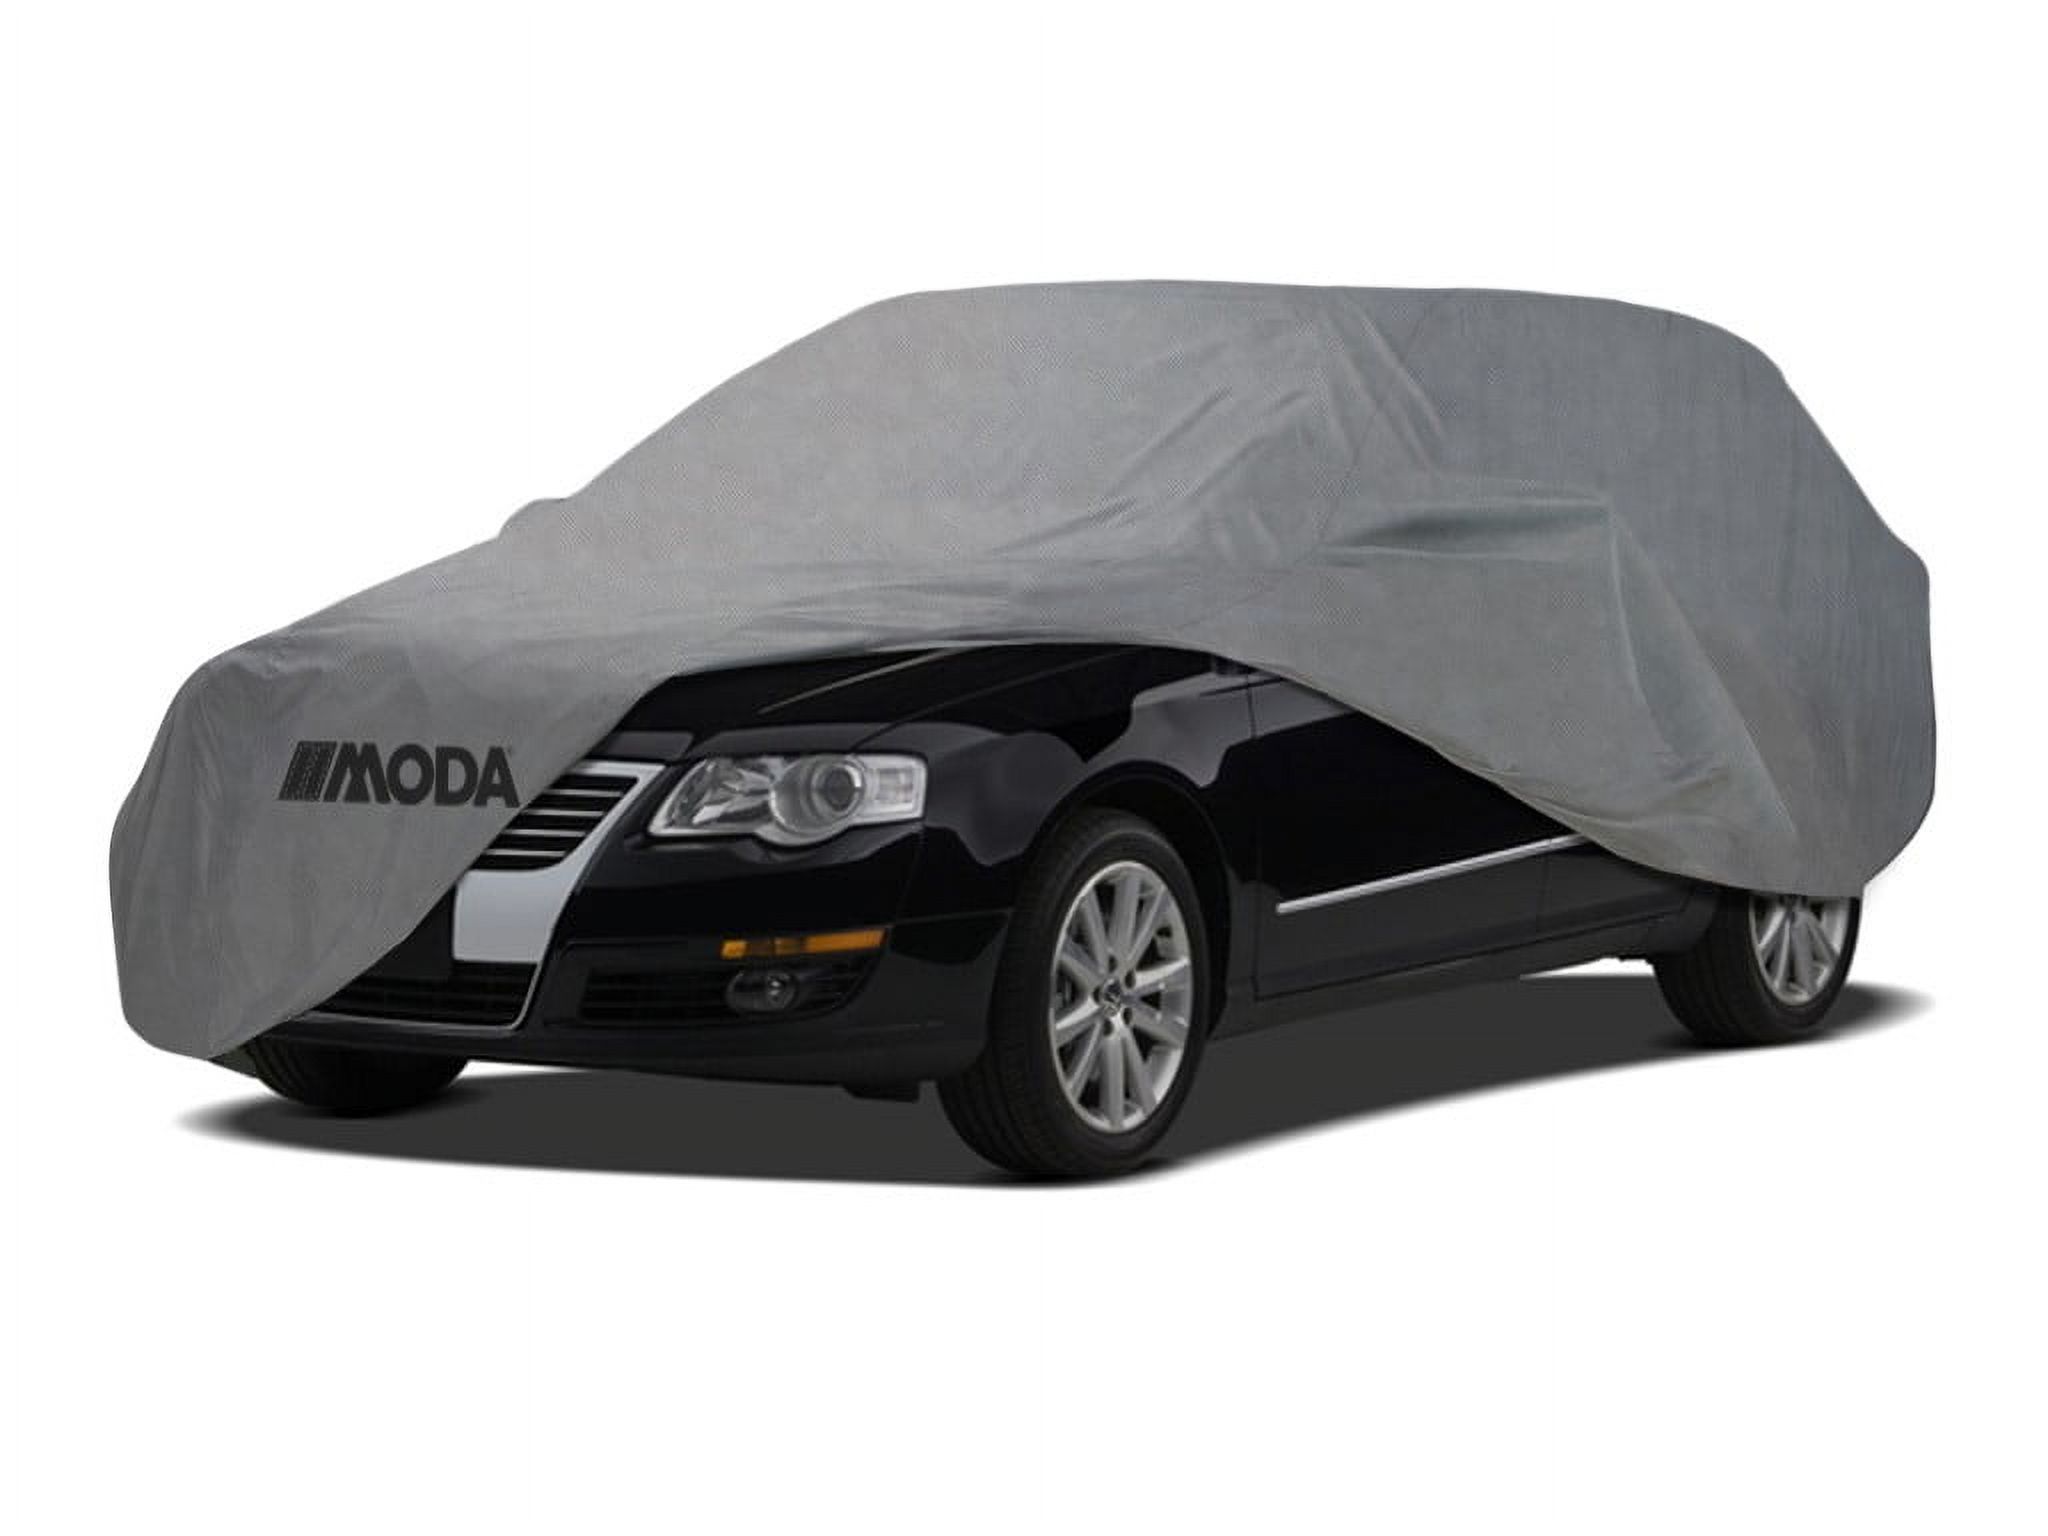 Coverking Universal Cover Fits Sedans Up To 16 ft 8 In Coverbond 4 Gray - image 1 of 2